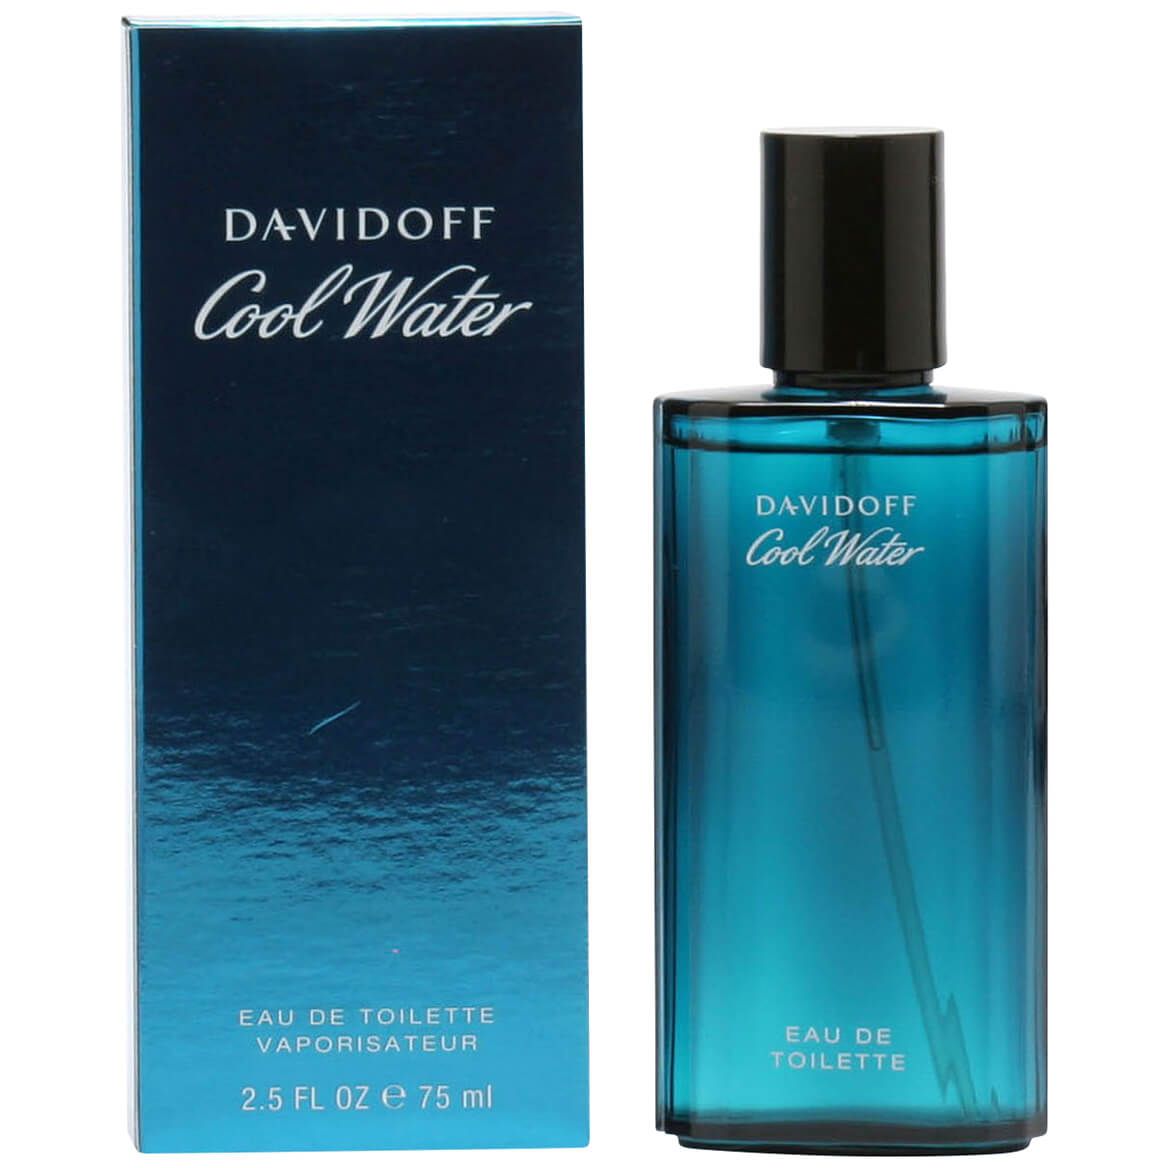 Cool Water by Davidoff for Men EDT, 2.5 oz. + '-' + 373156